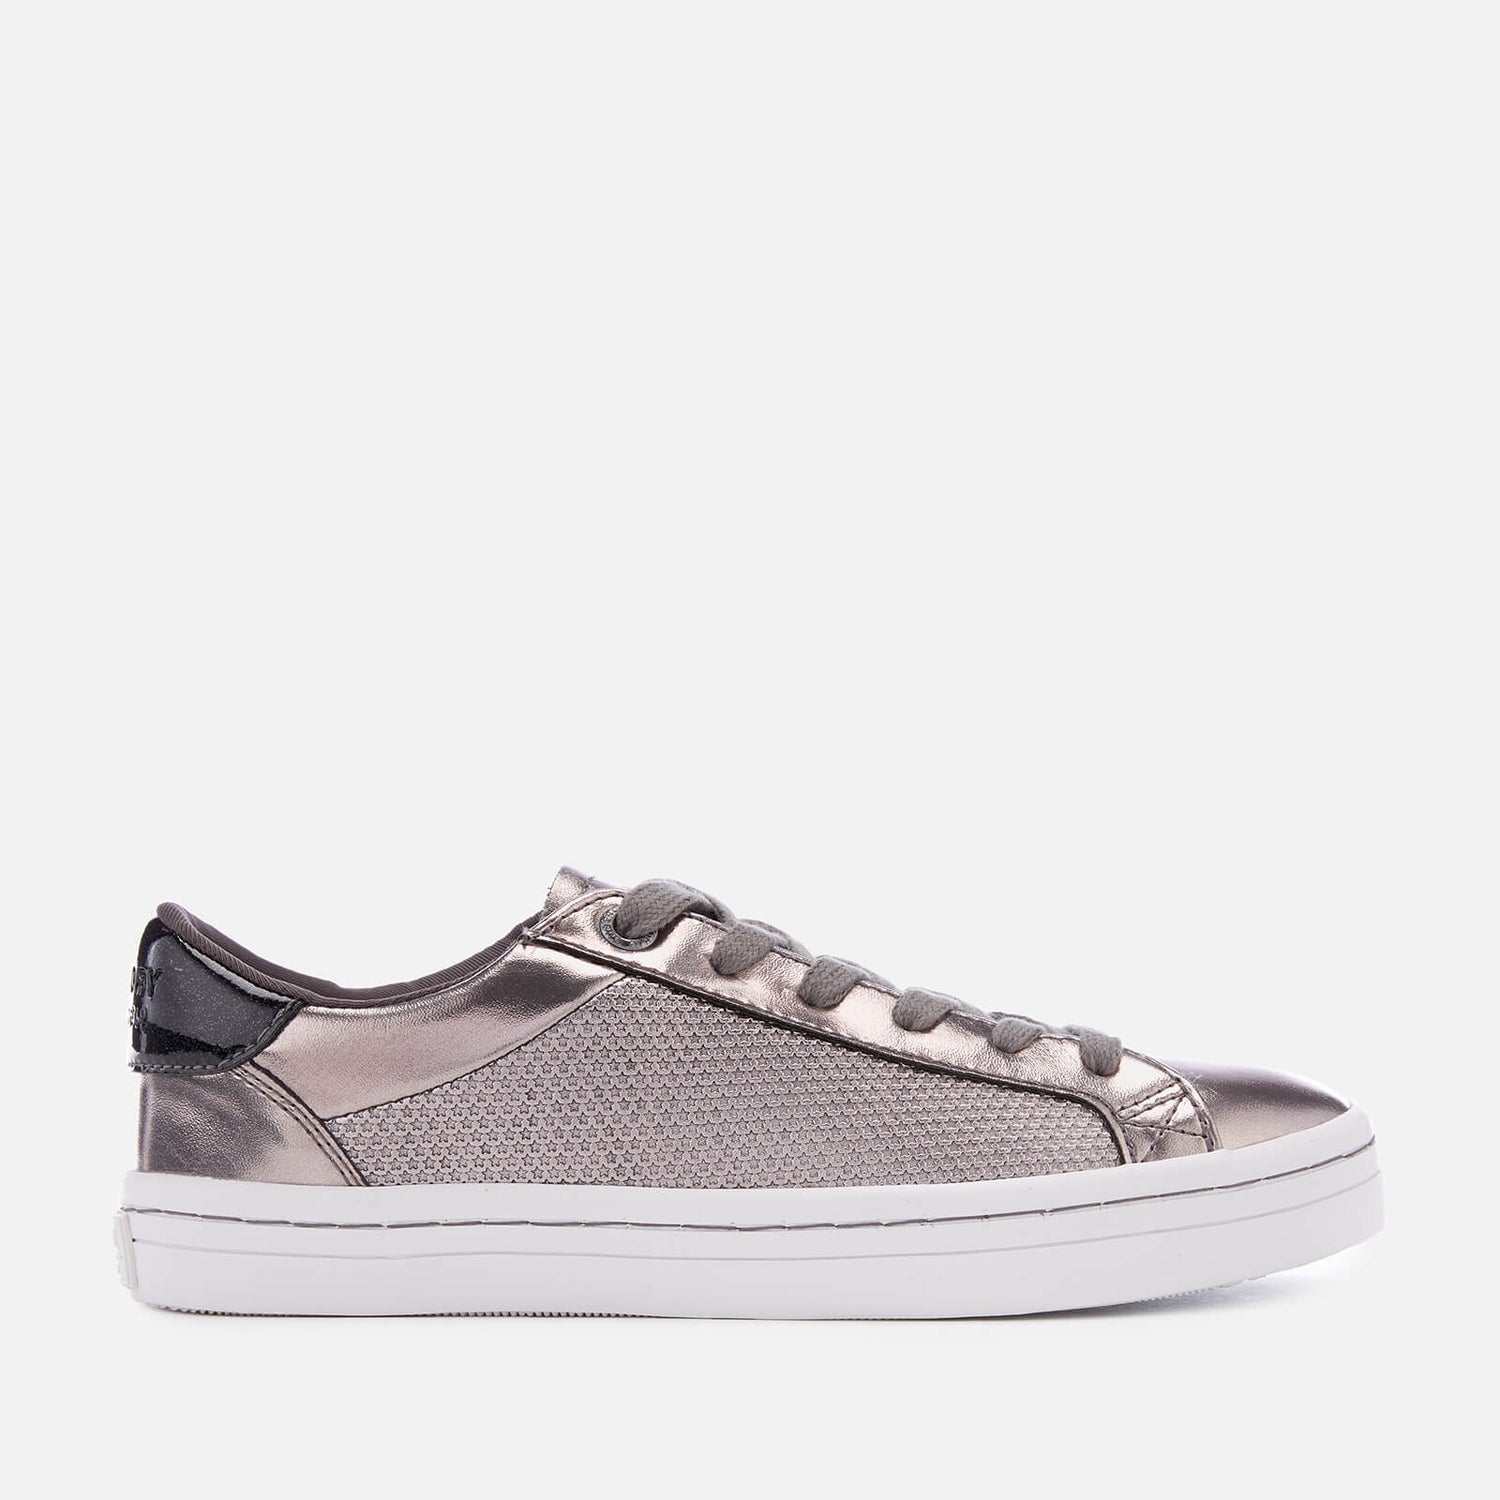 Superdry Women's Skater Sleek Lo Trainers - Pewter | FREE UK Delivery ...